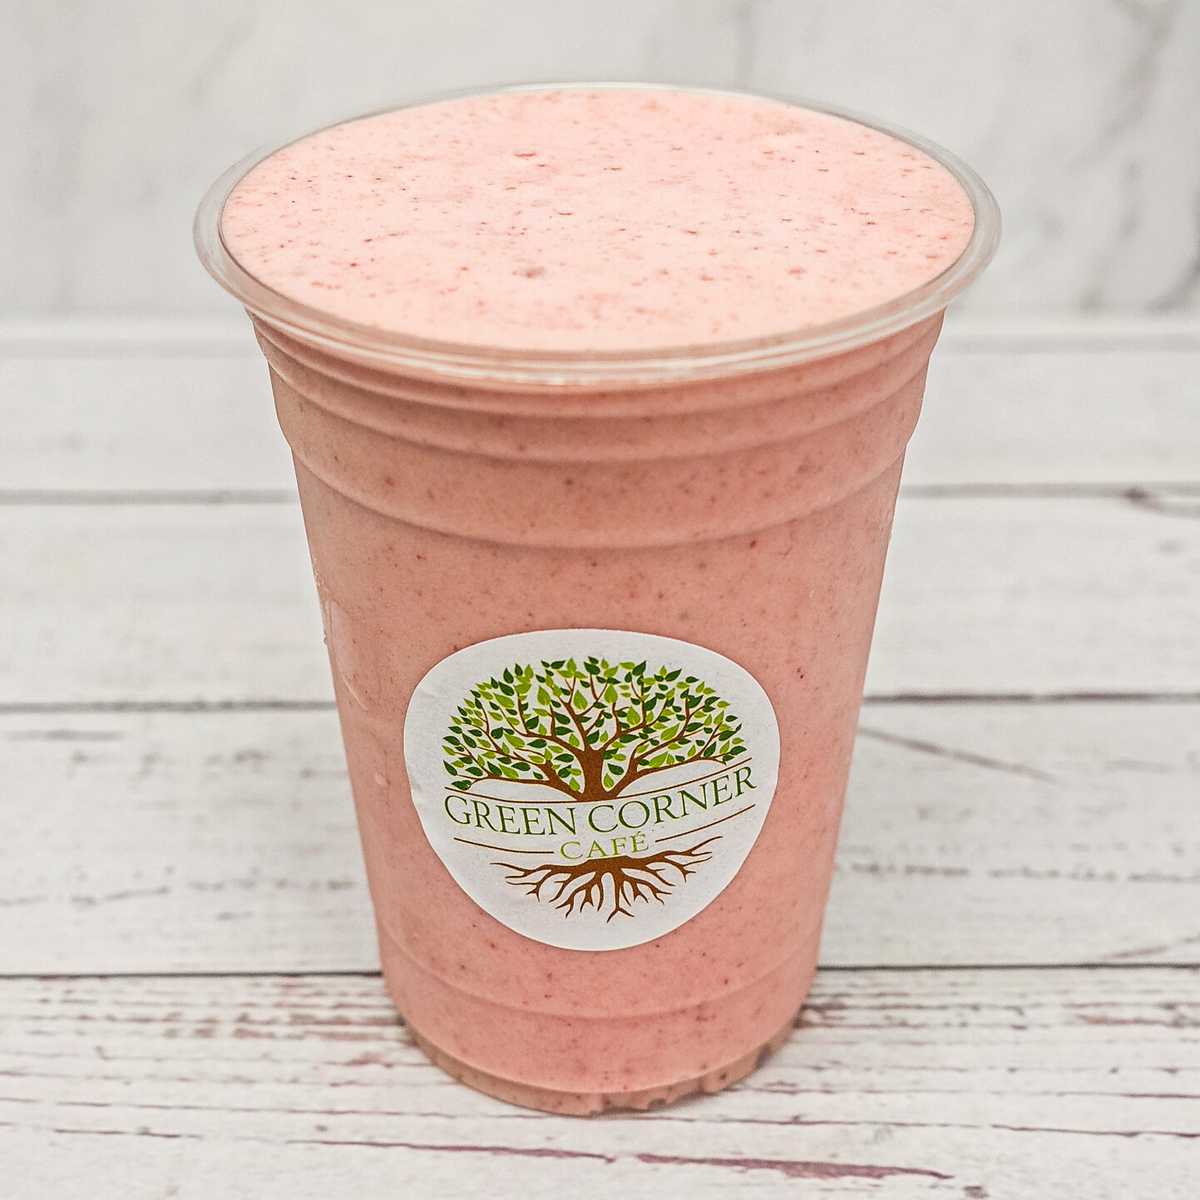 Scotch Plains, NJ's Favorite Strawberry Banana Smoothie – Fresh Strawberries, Ripe Bananas, Milk (Dairy or Almond), and Vanilla Protein Powder. A fruity delight in every sip.